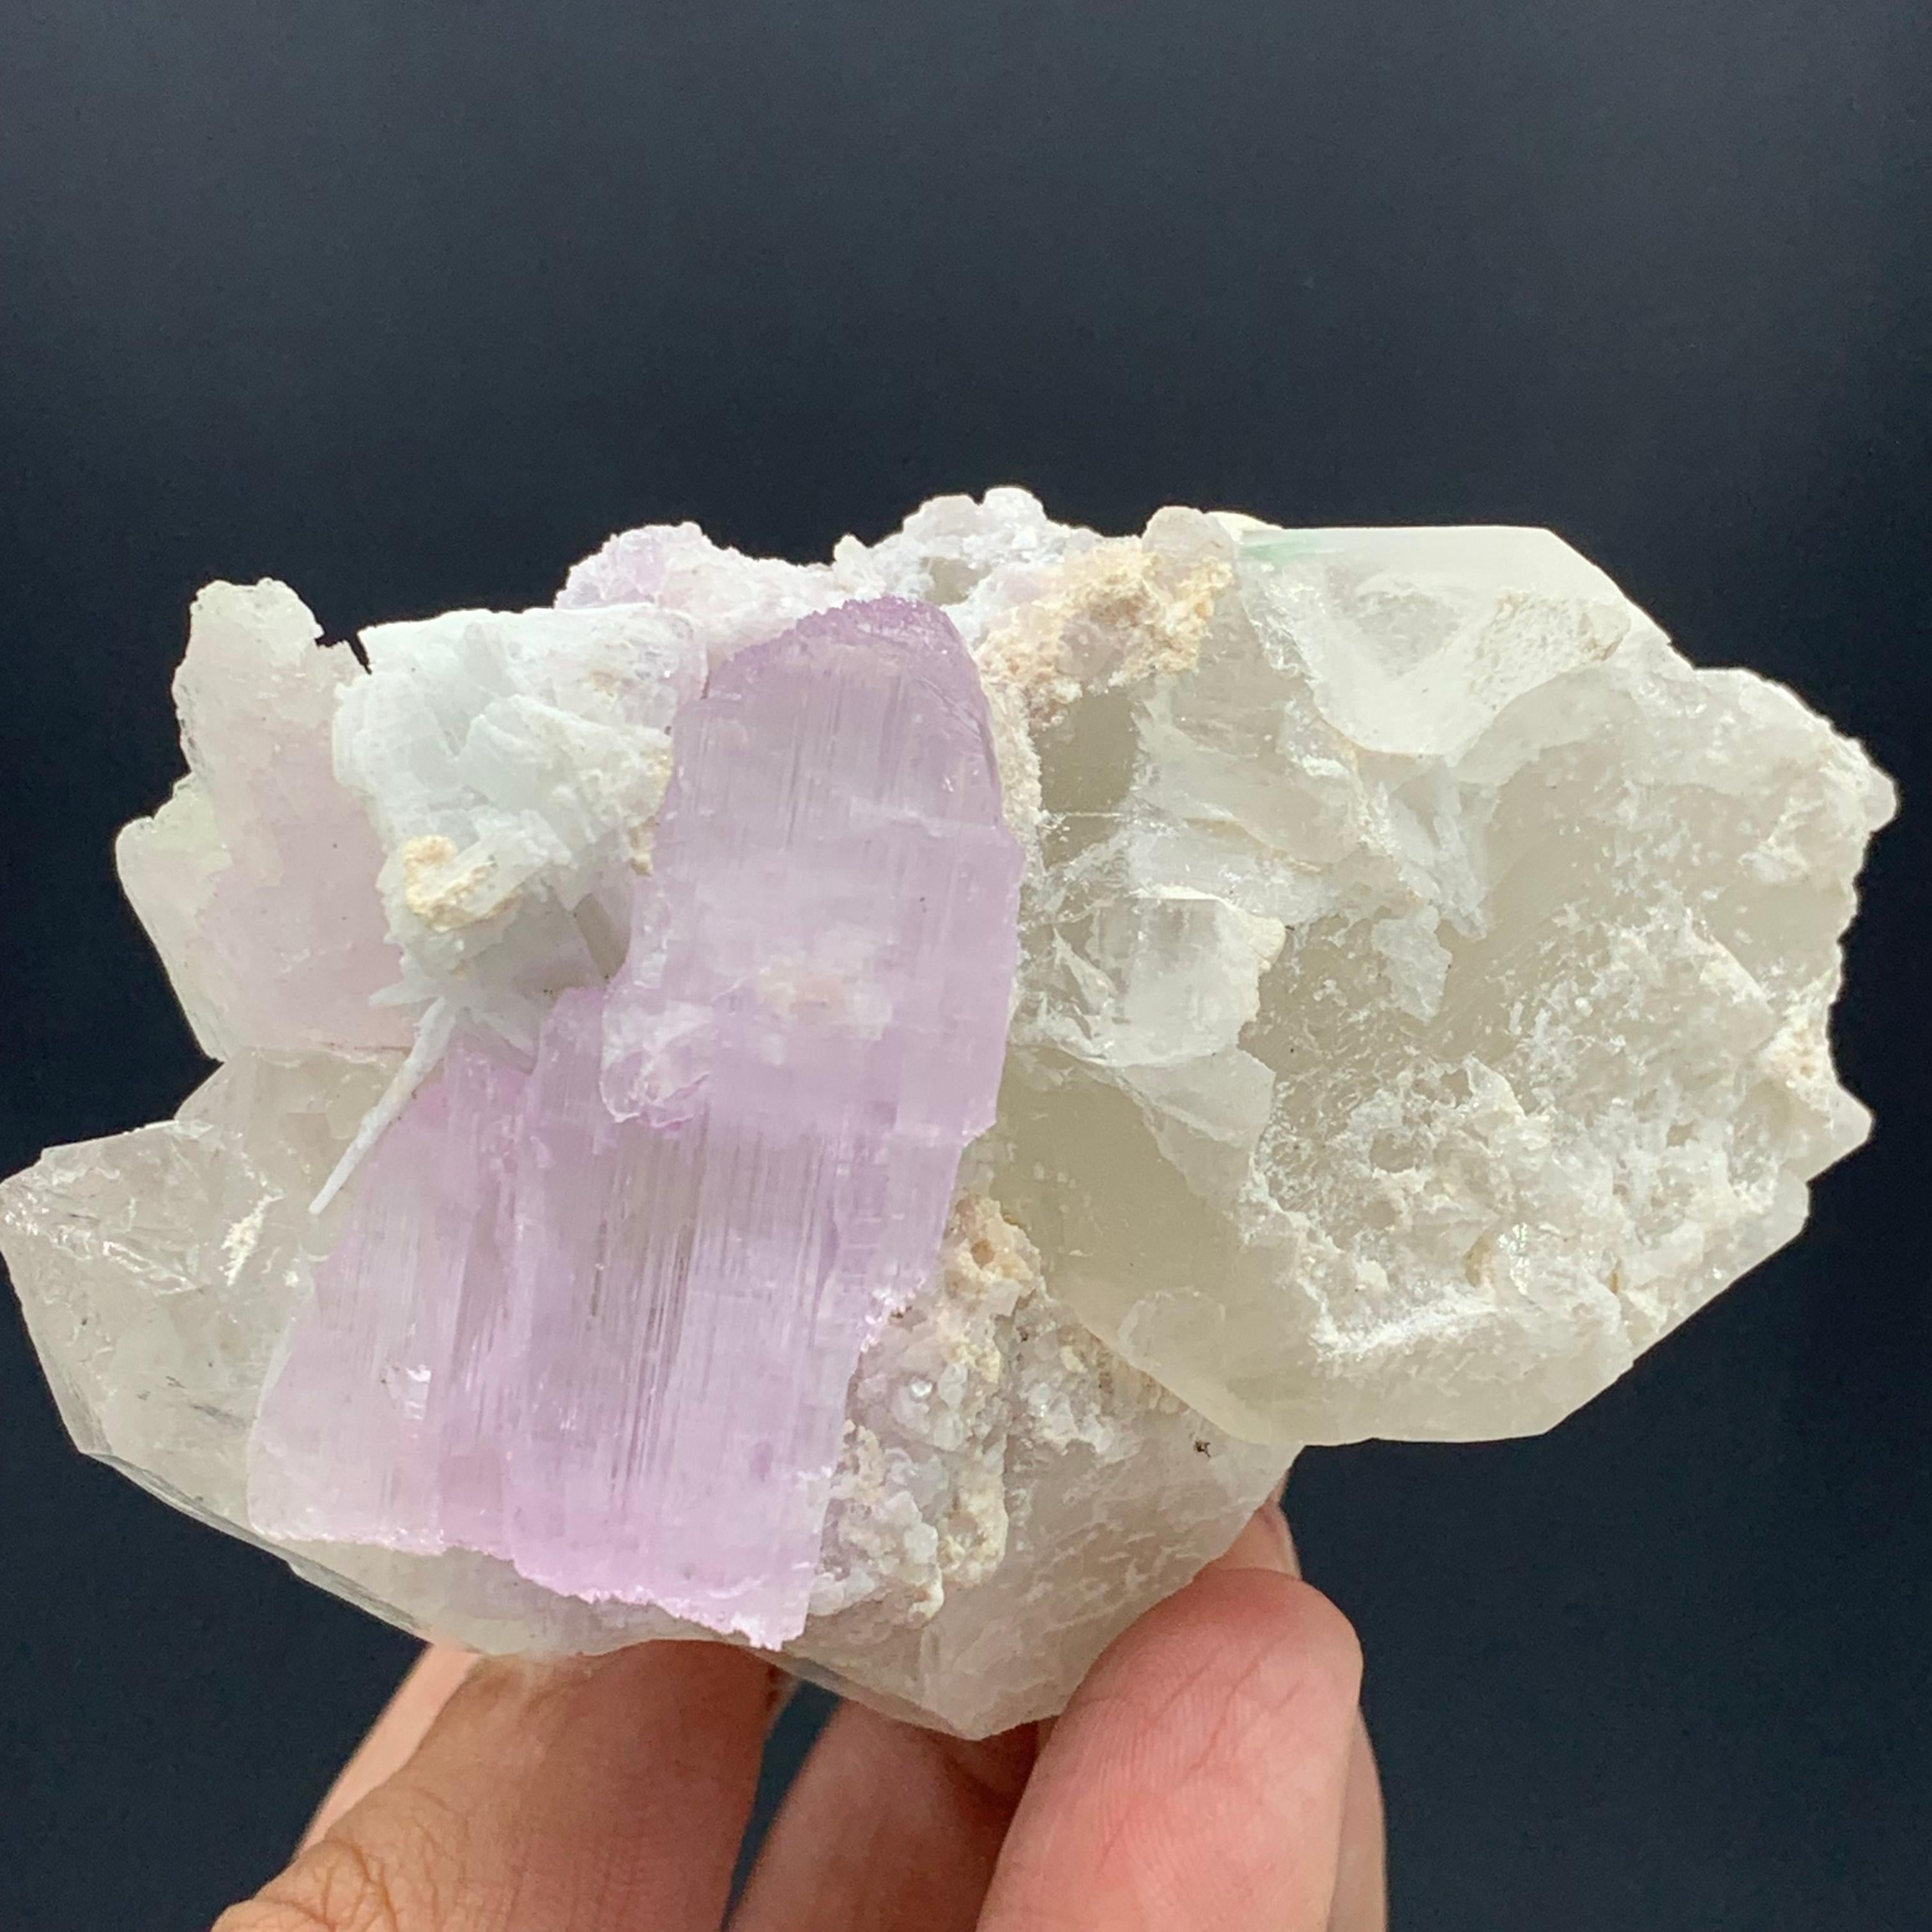 264.75 Gram Adorable Kunzite Specimen From Afghanistan 
Weight: 264.75 Gram 
Dimension: 5.1 x 8.6 x 5.4 Cm
Origin : Afghanistan 

Kunzite is used for stimulating your crown chakra and your heart chakra. This means it might give you high vibrations